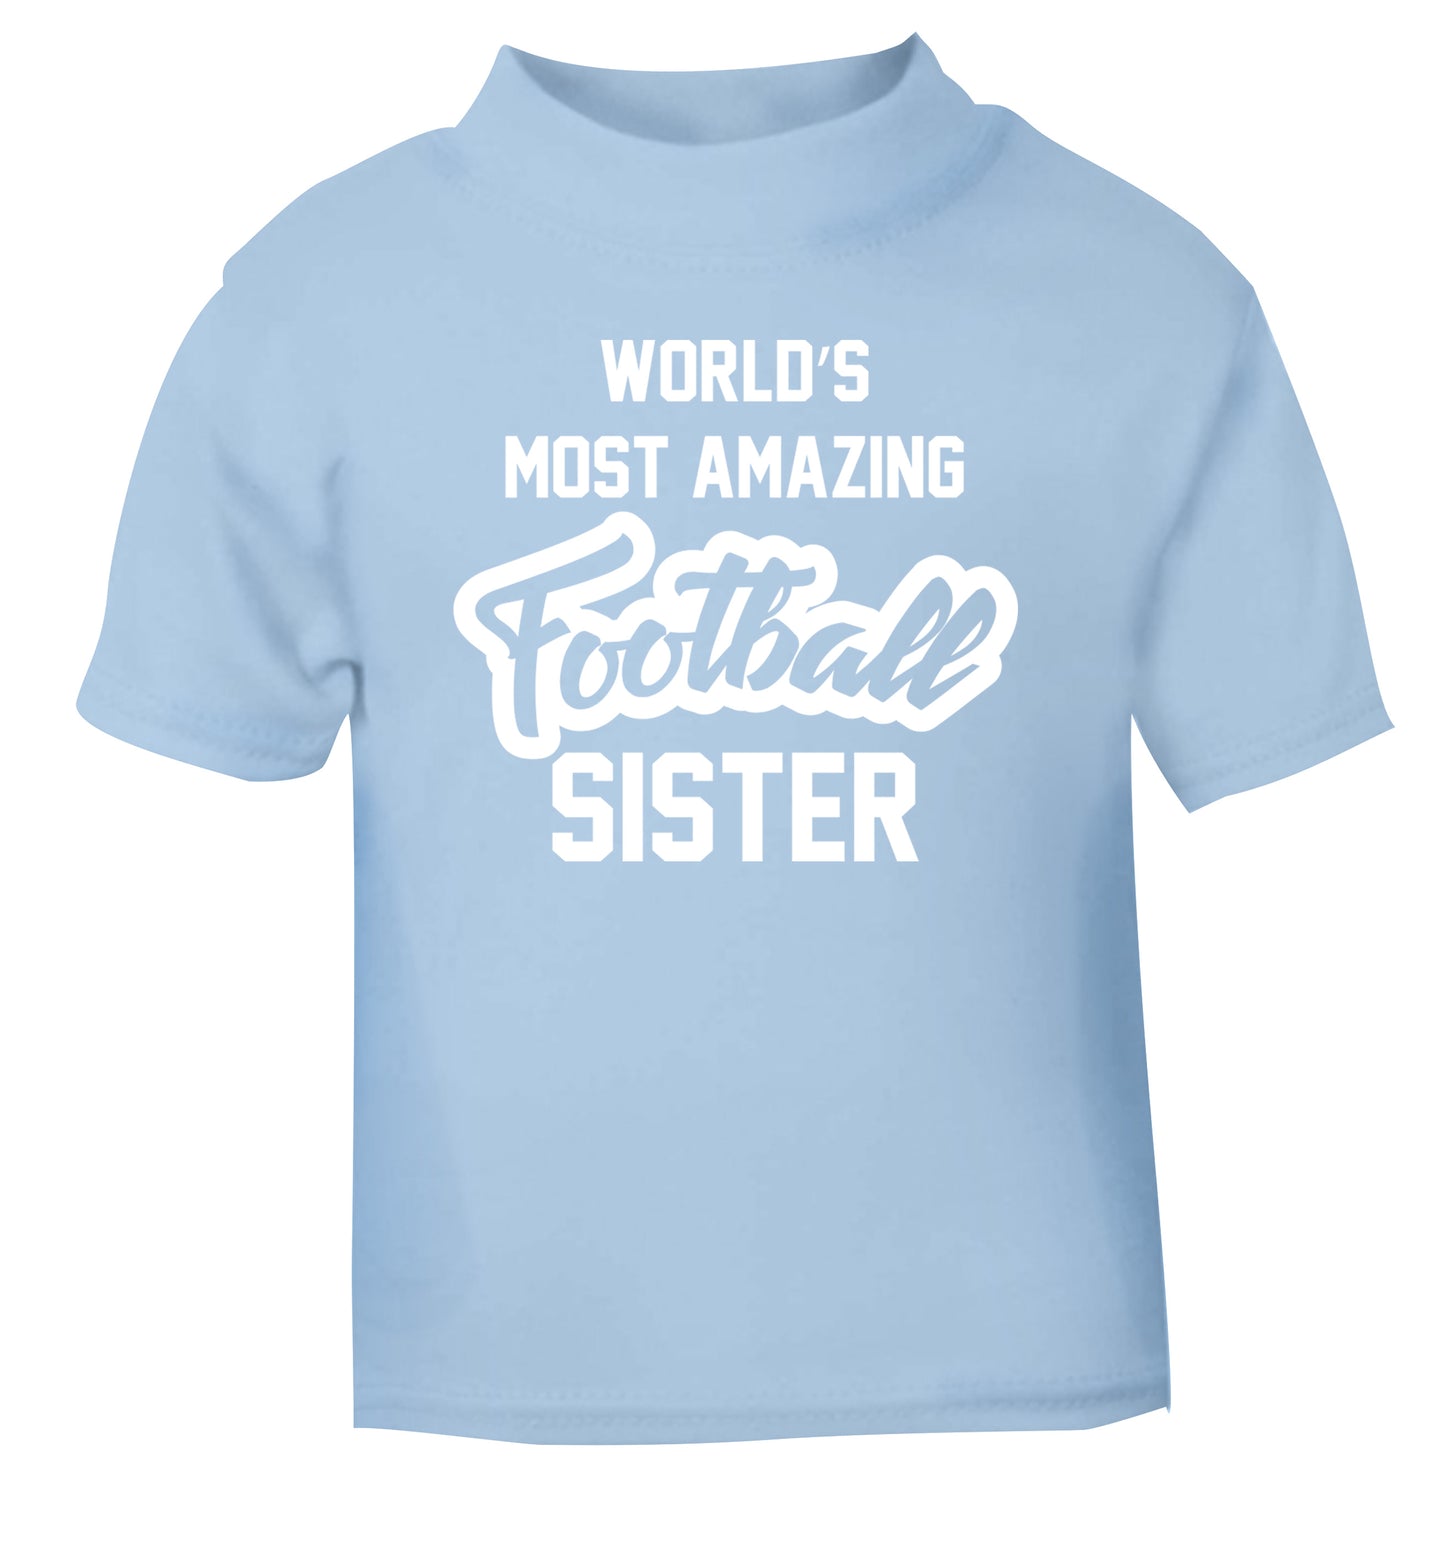 Worlds most amazing football sister light blue Baby Toddler Tshirt 2 Years